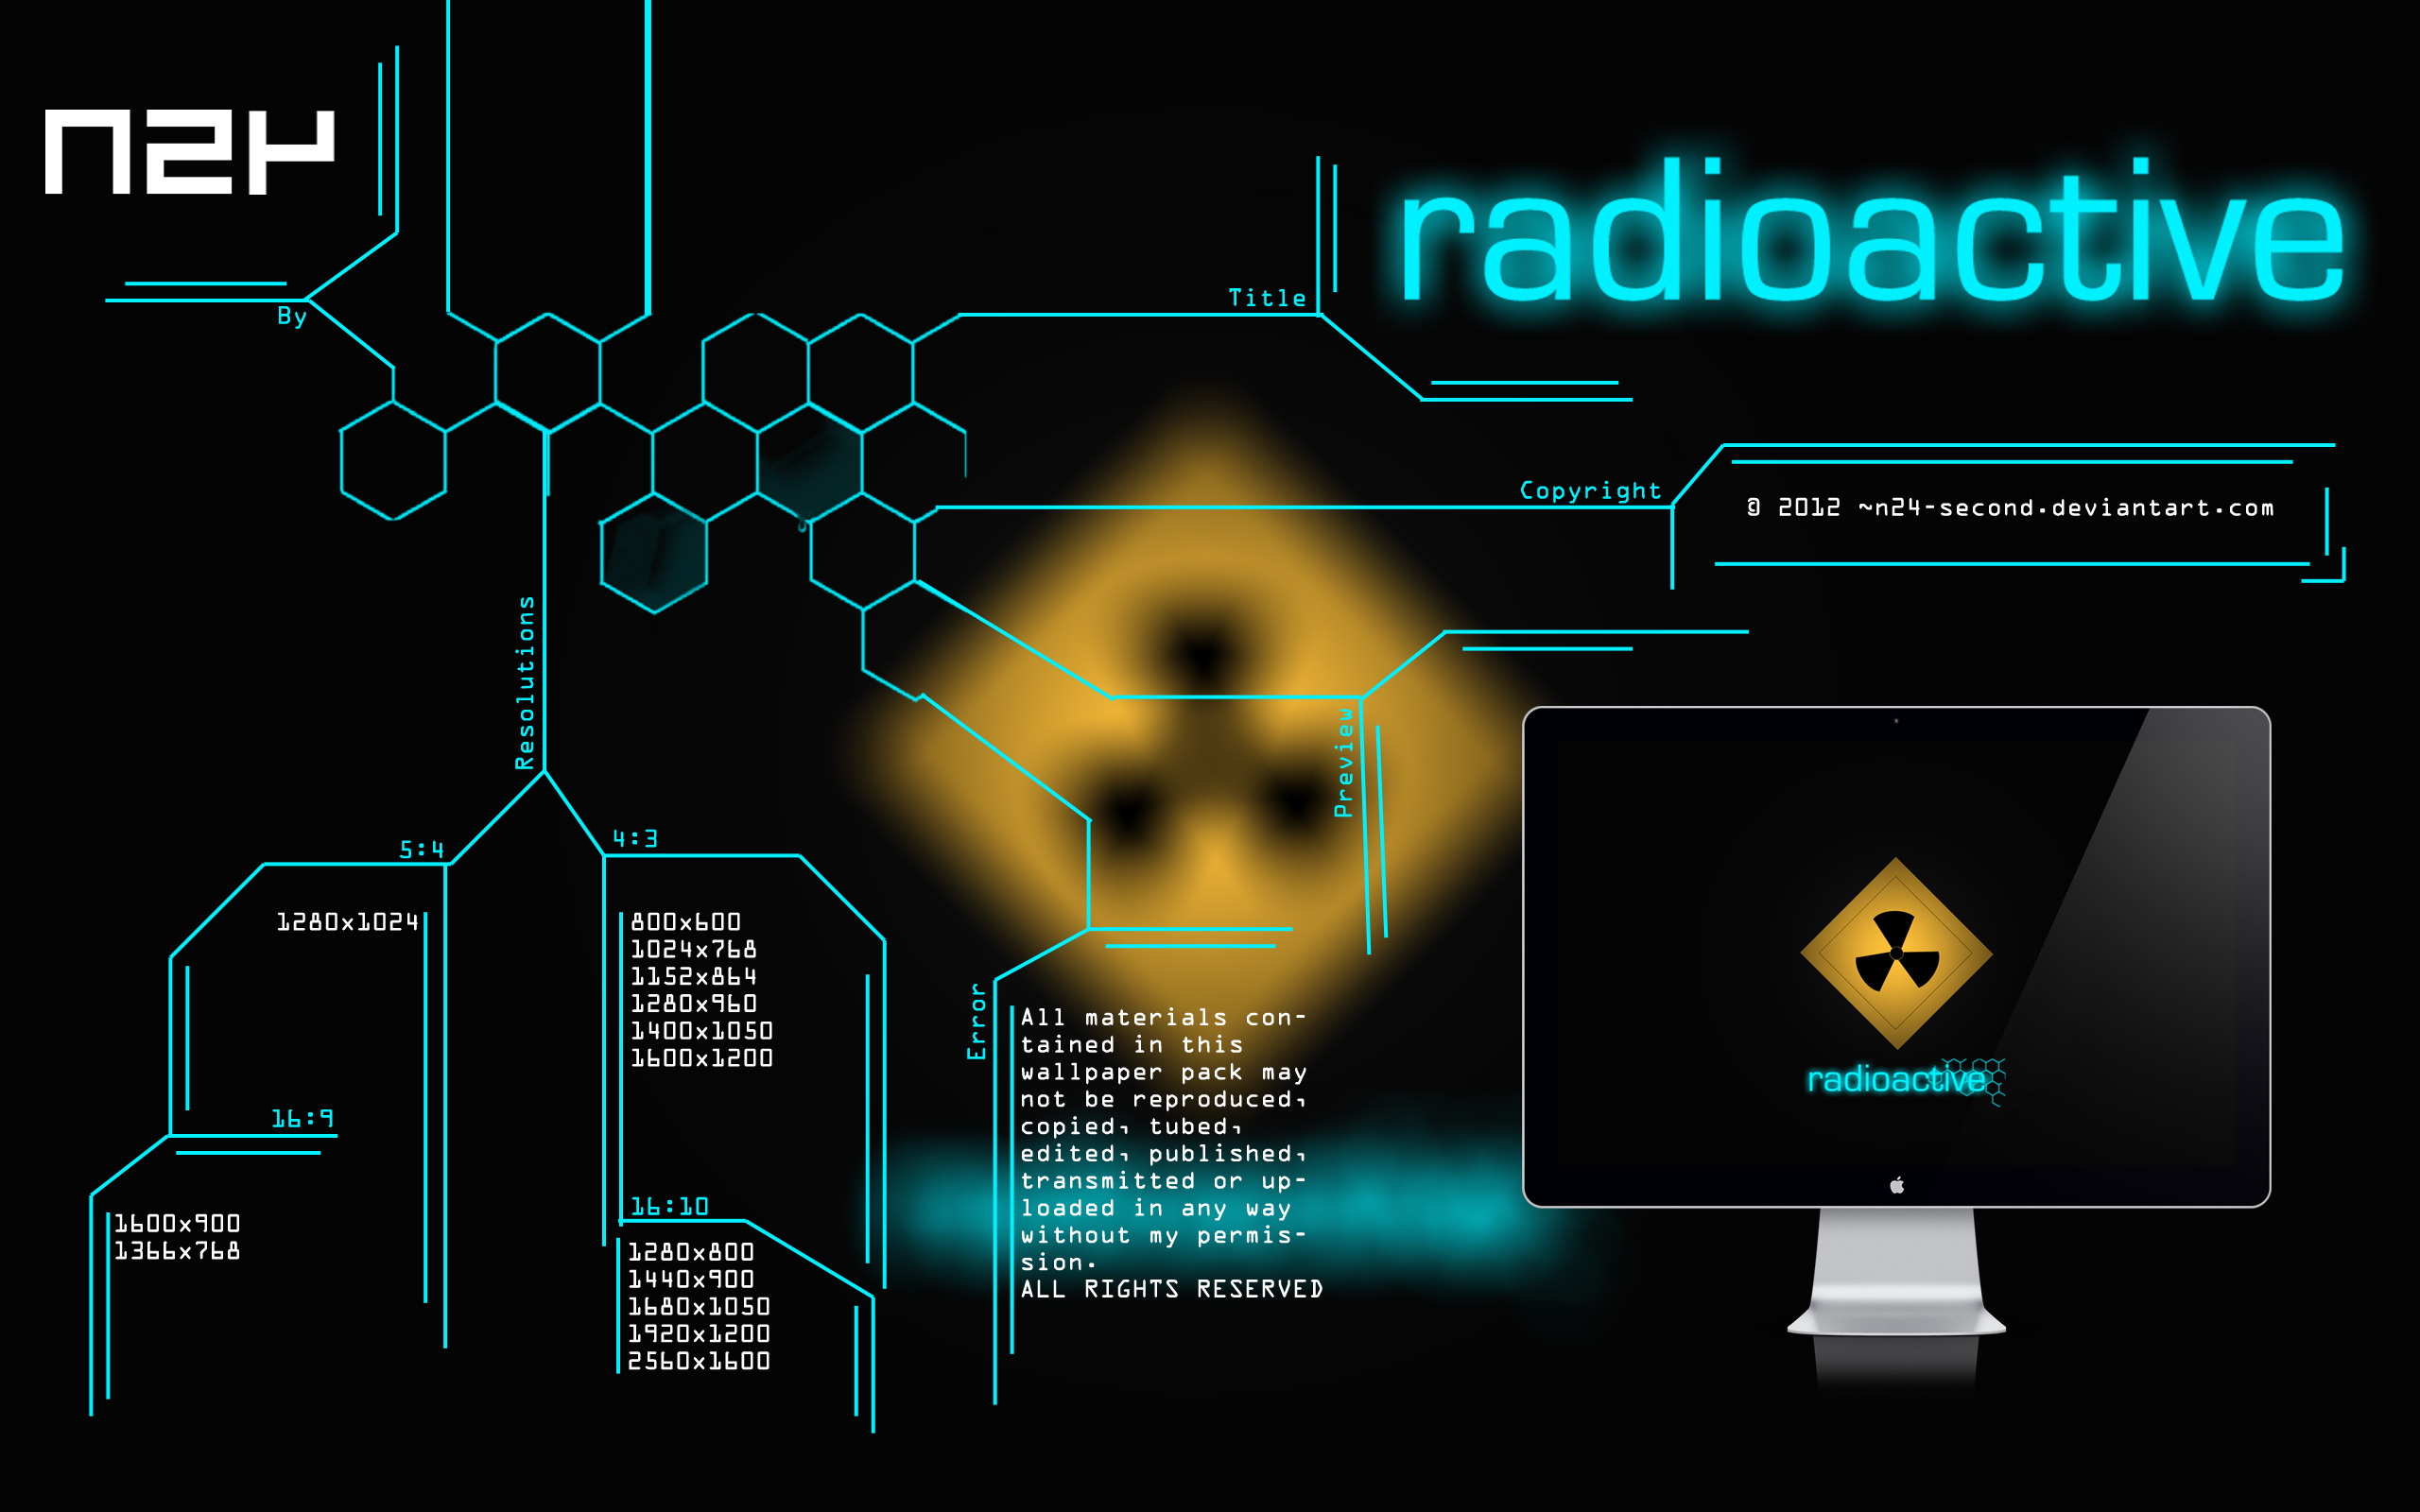 2560x1600 Radioactive by n24-second